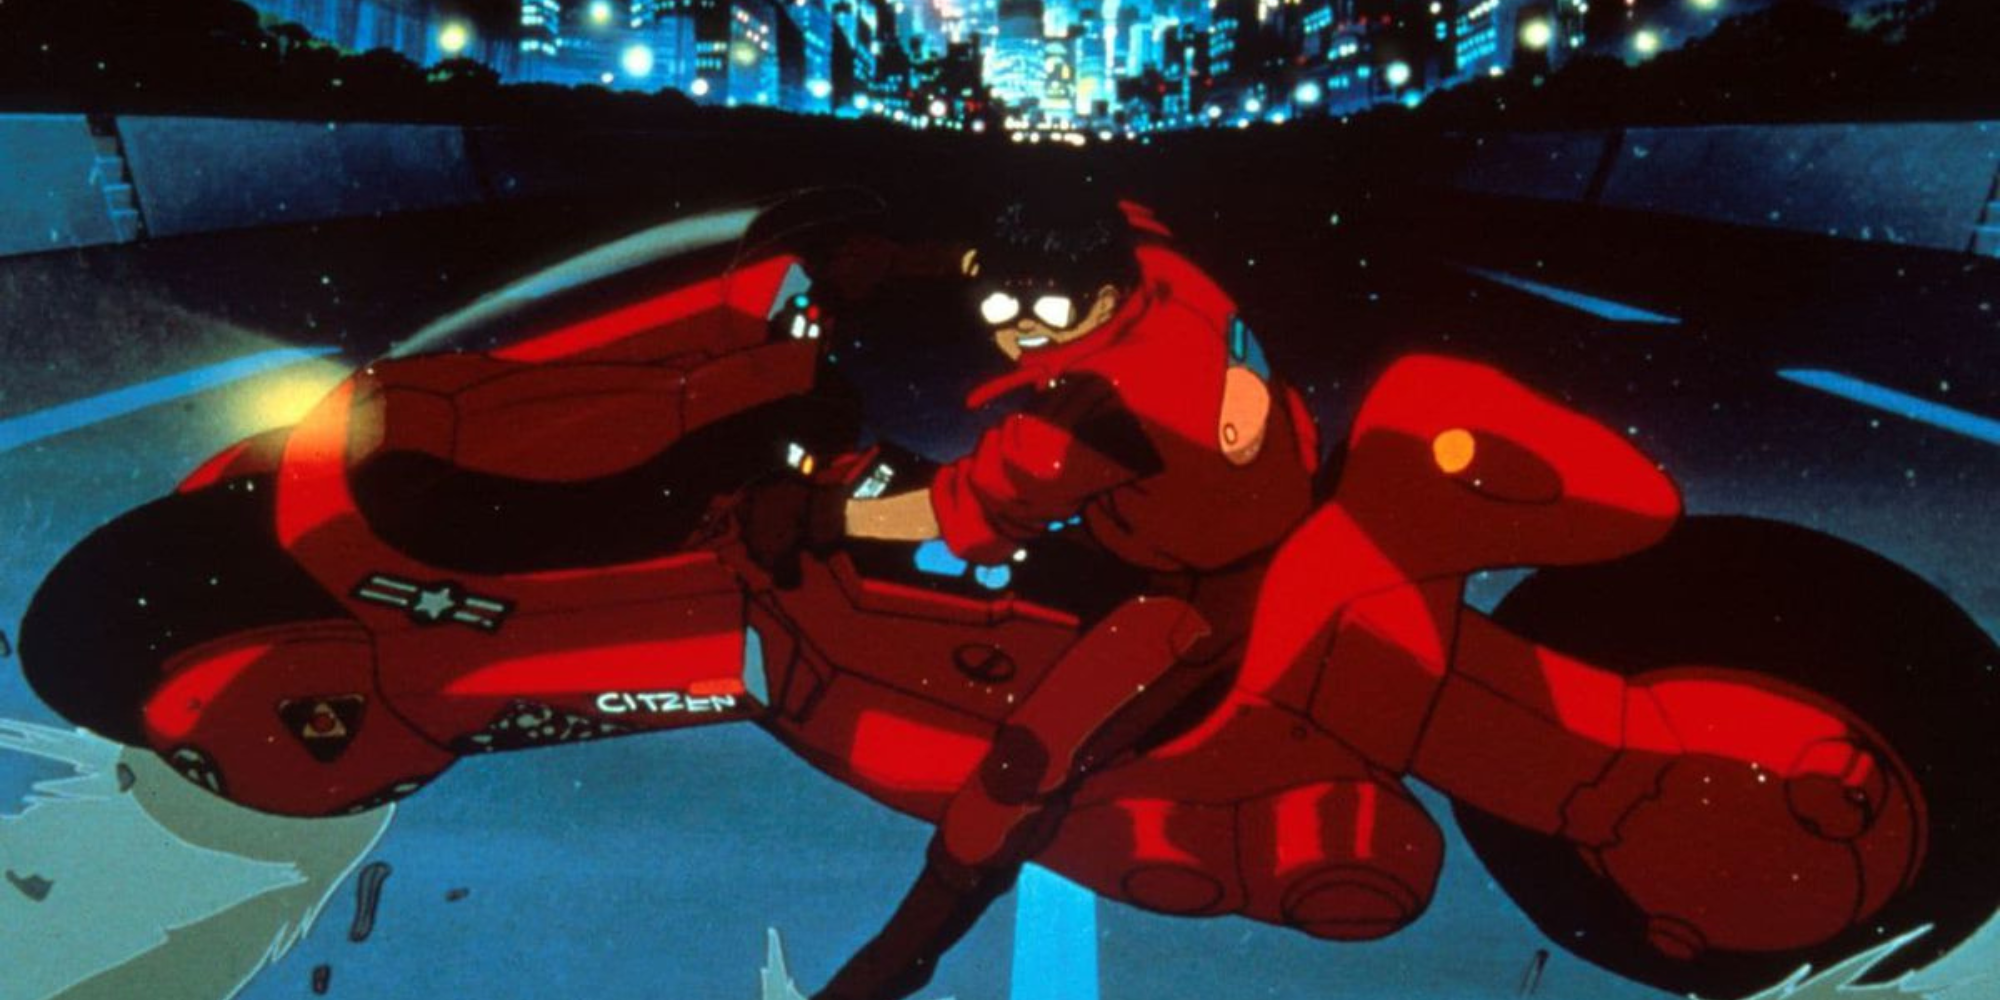 Akira riding his iconic red motorcycle